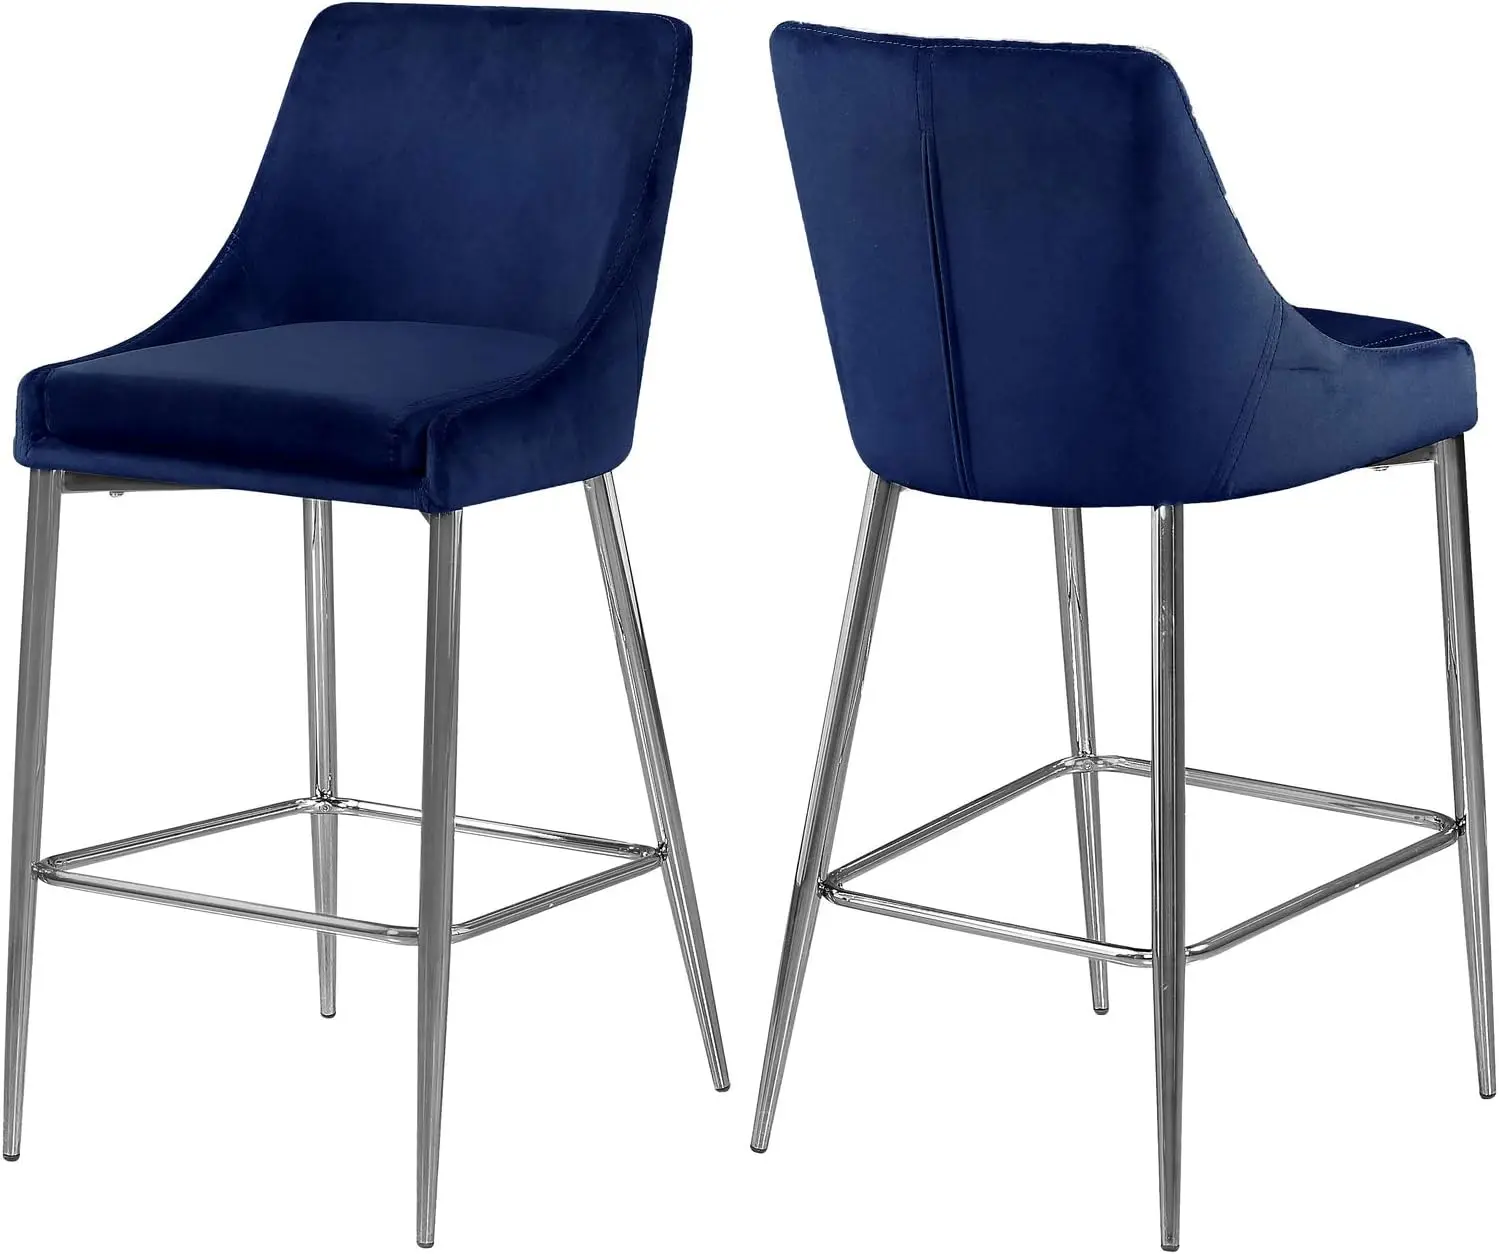 

Furniture Karina Collection Modern | Contemporary Velvet Upholstered Counter Stool with Polished Chrome Metal Legs and Foot Rest